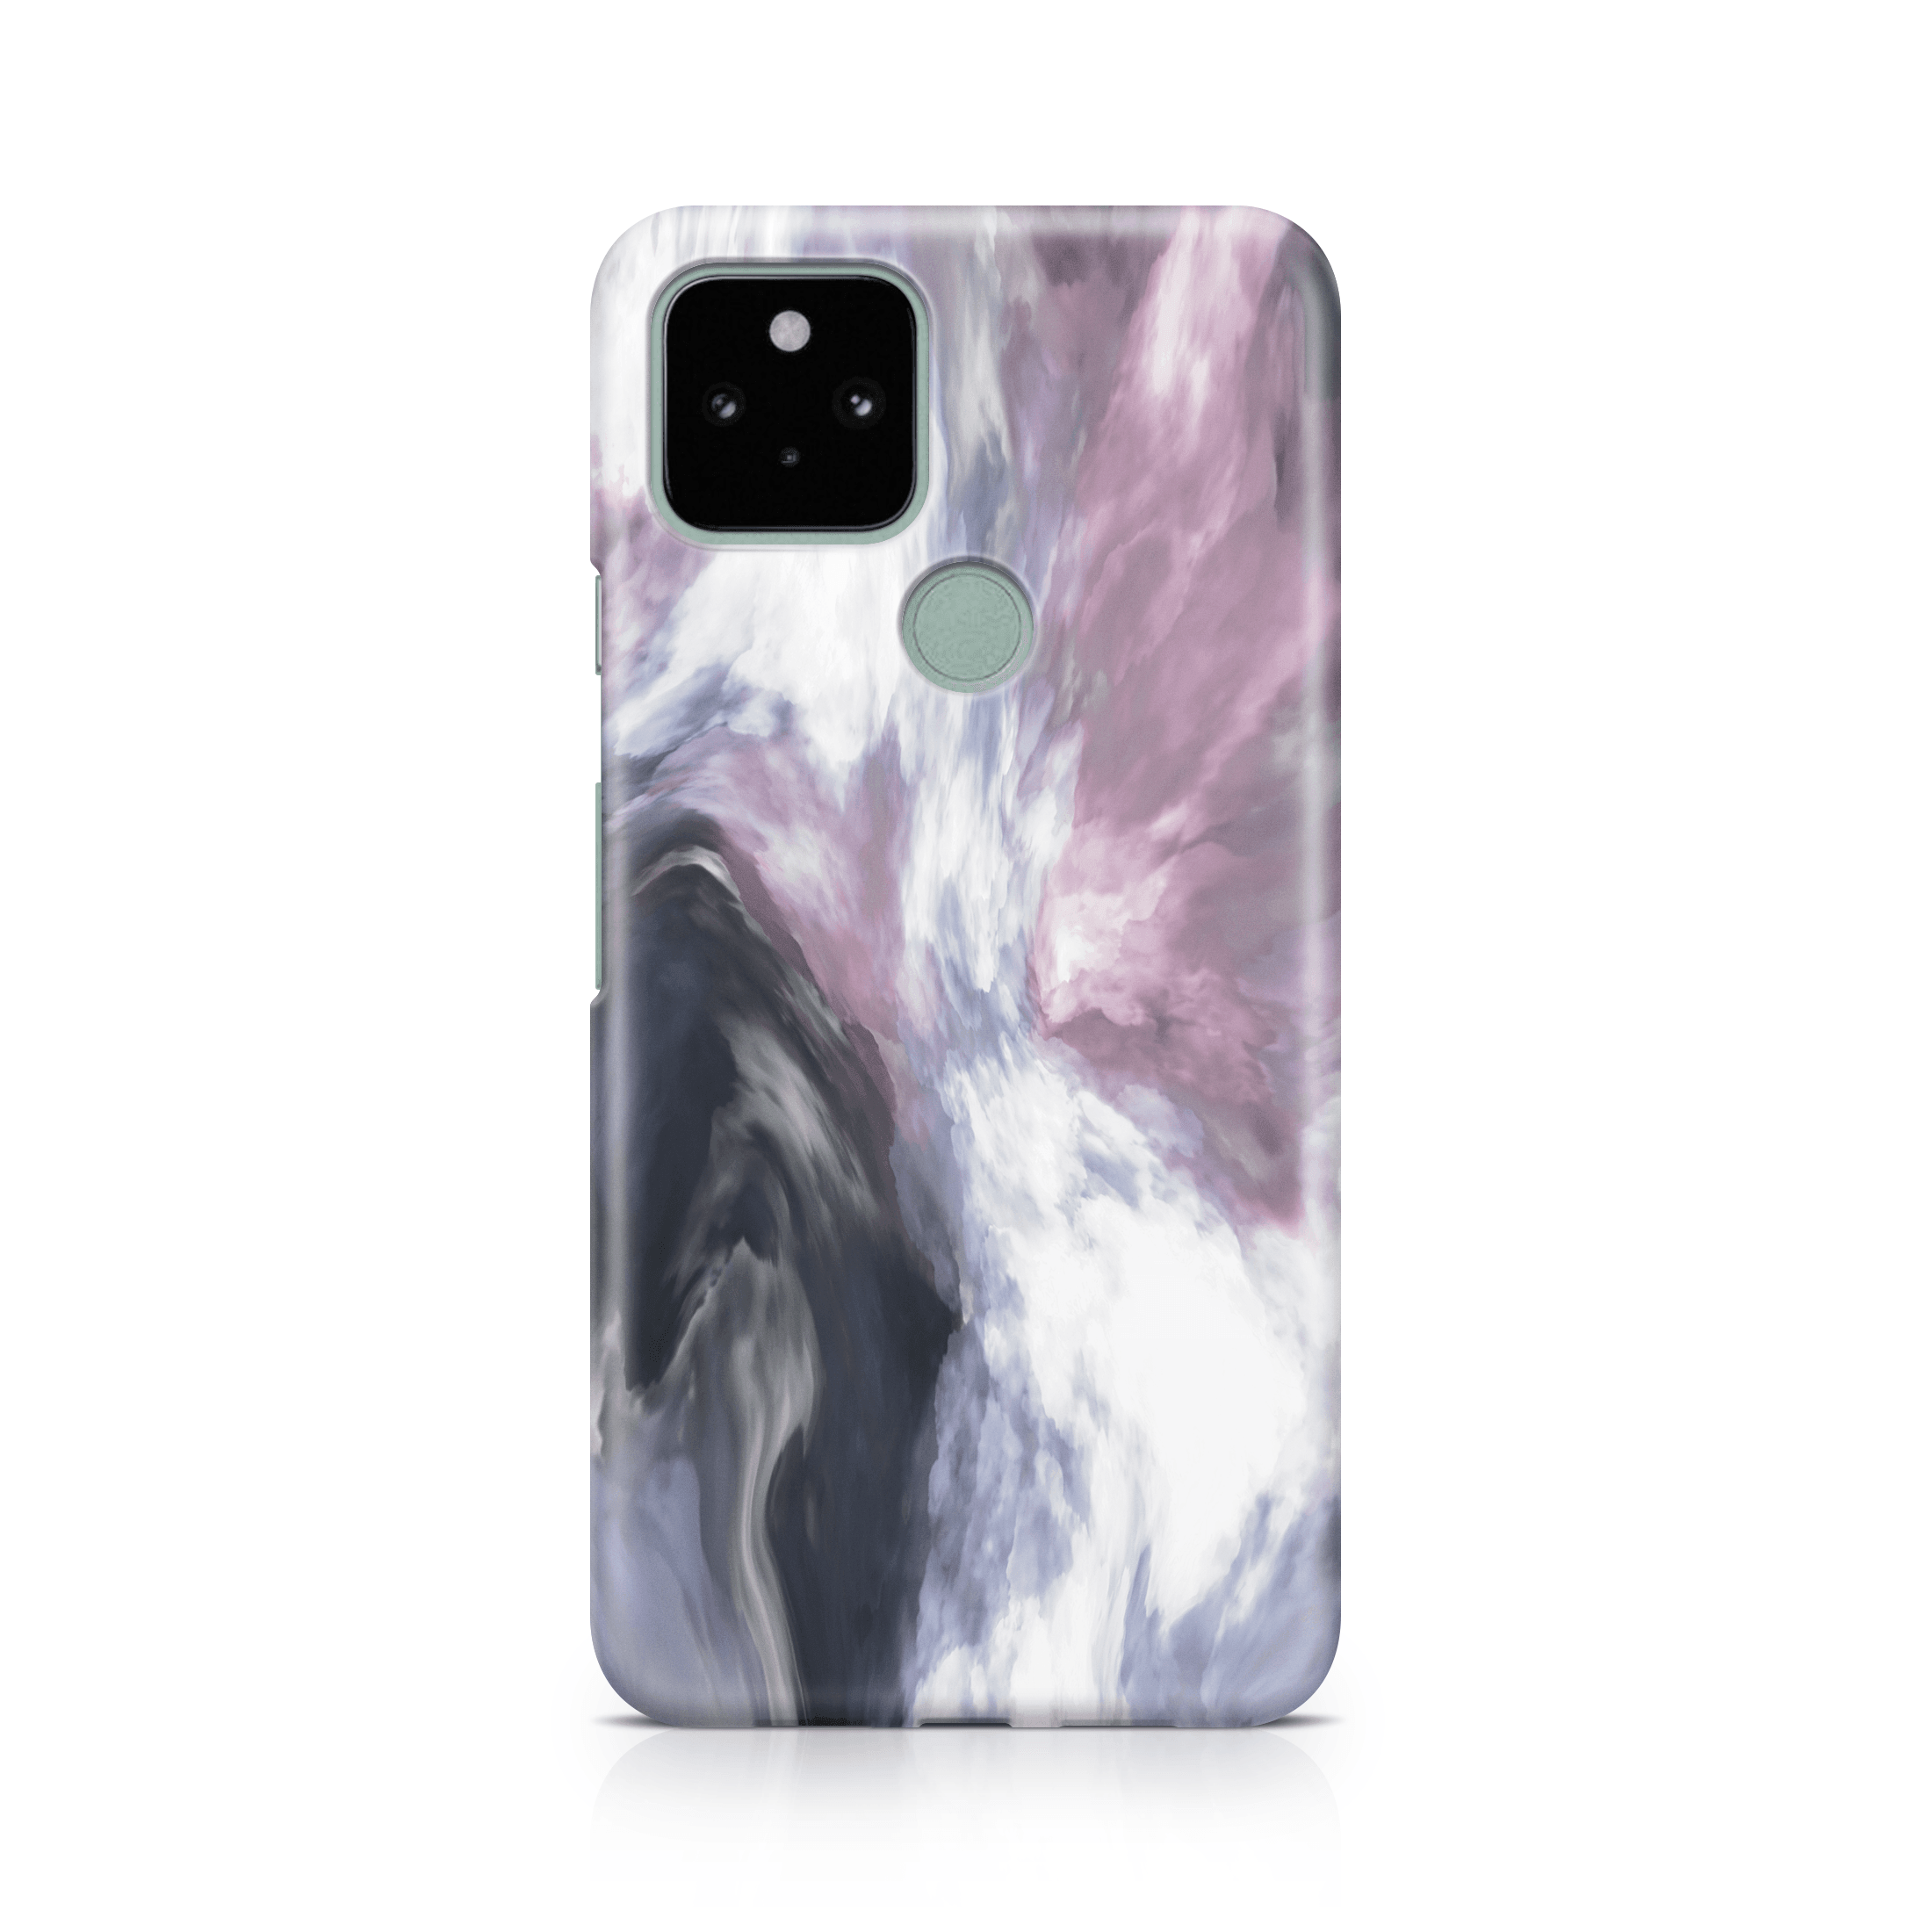 Eye of the Storm - Google phone case designs by CaseSwagger